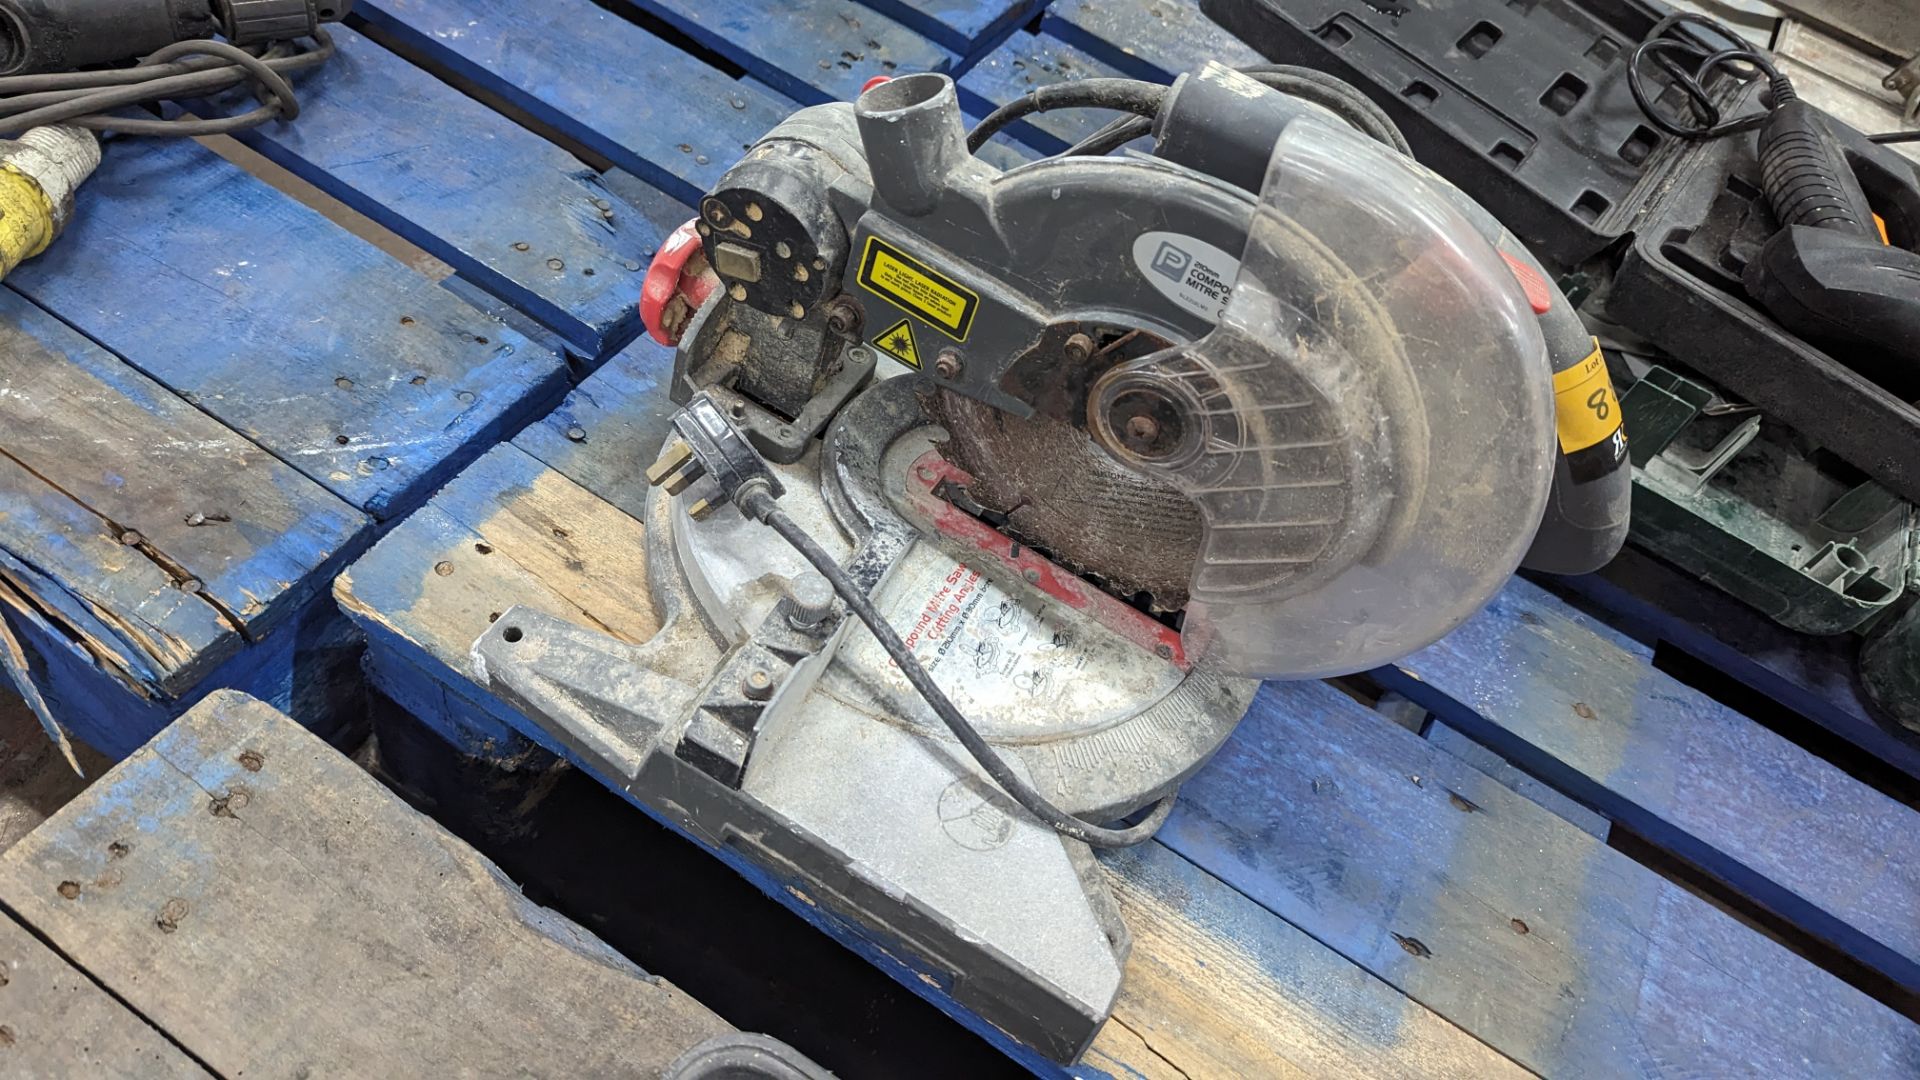 Performance Pro compound mitre saw model NLE210LMS, cutting angles - Image 5 of 8